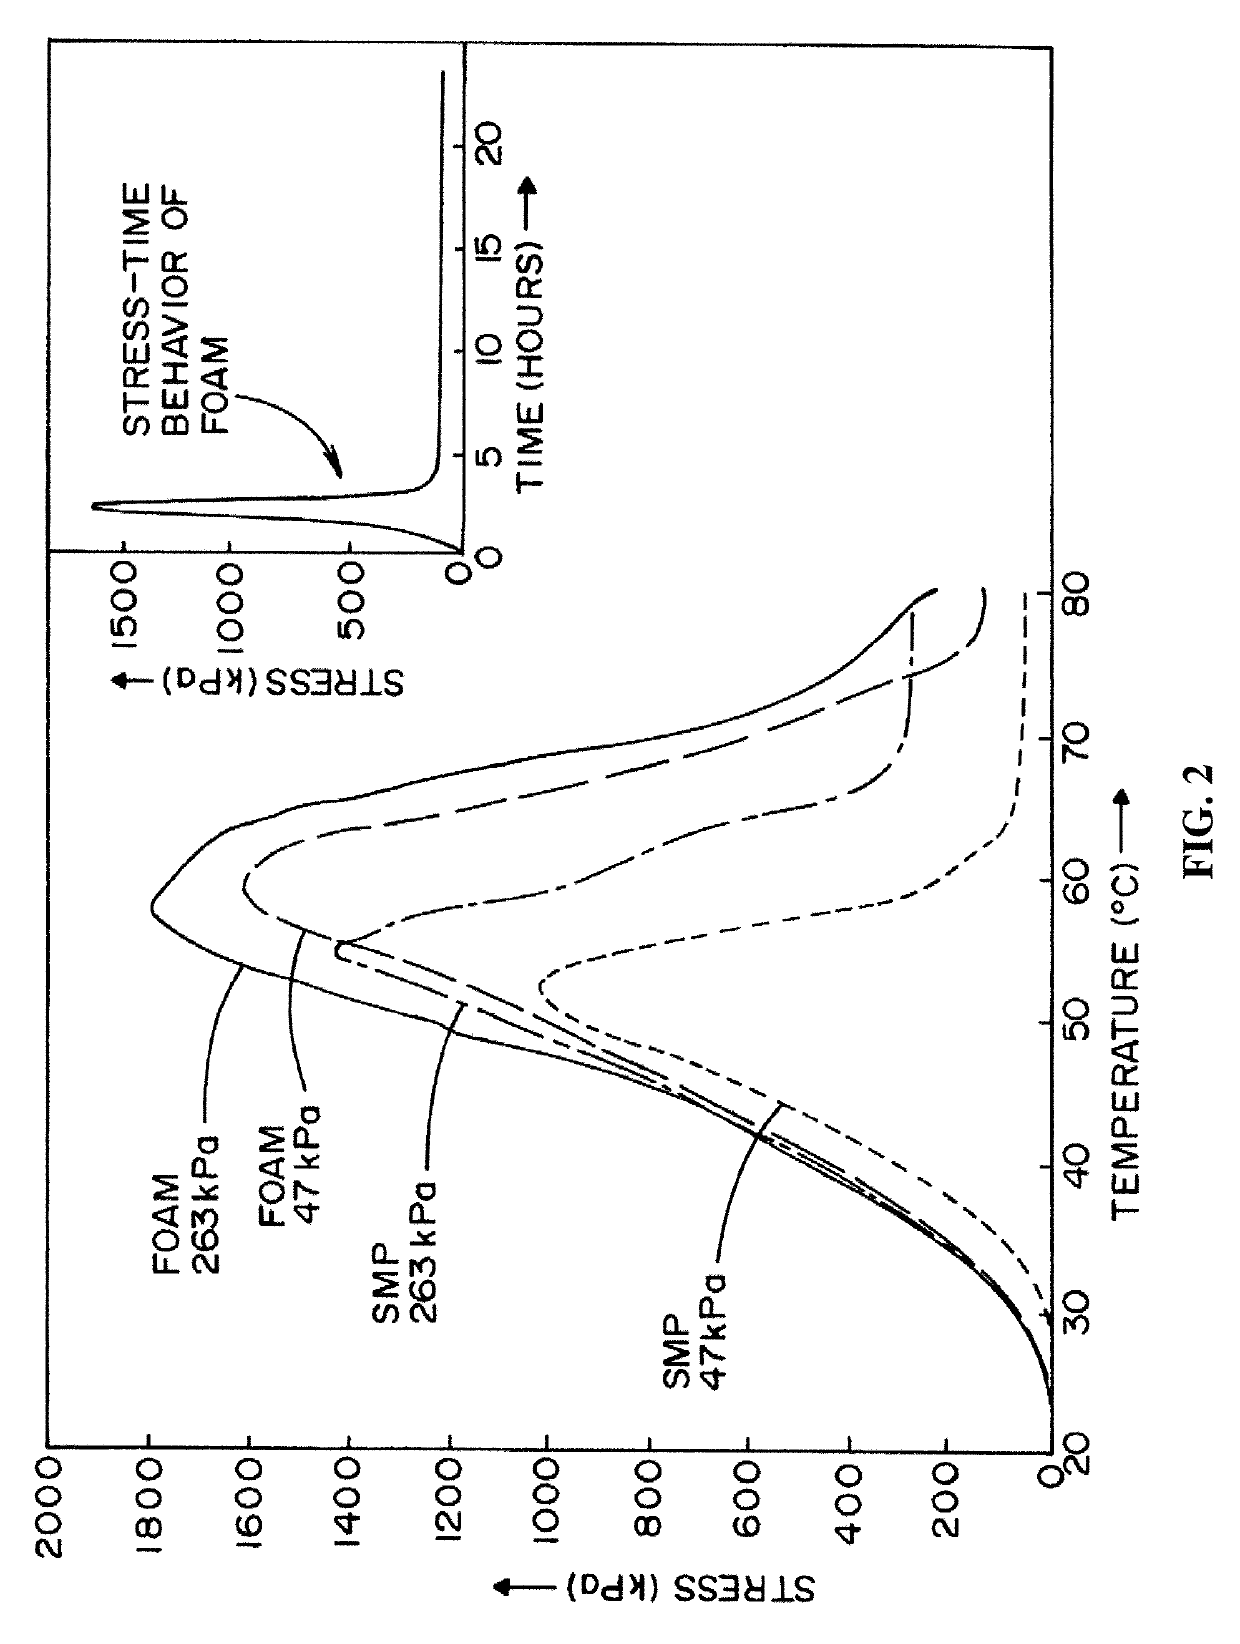 Method of Improving Wellbore Integrity and Loss Control